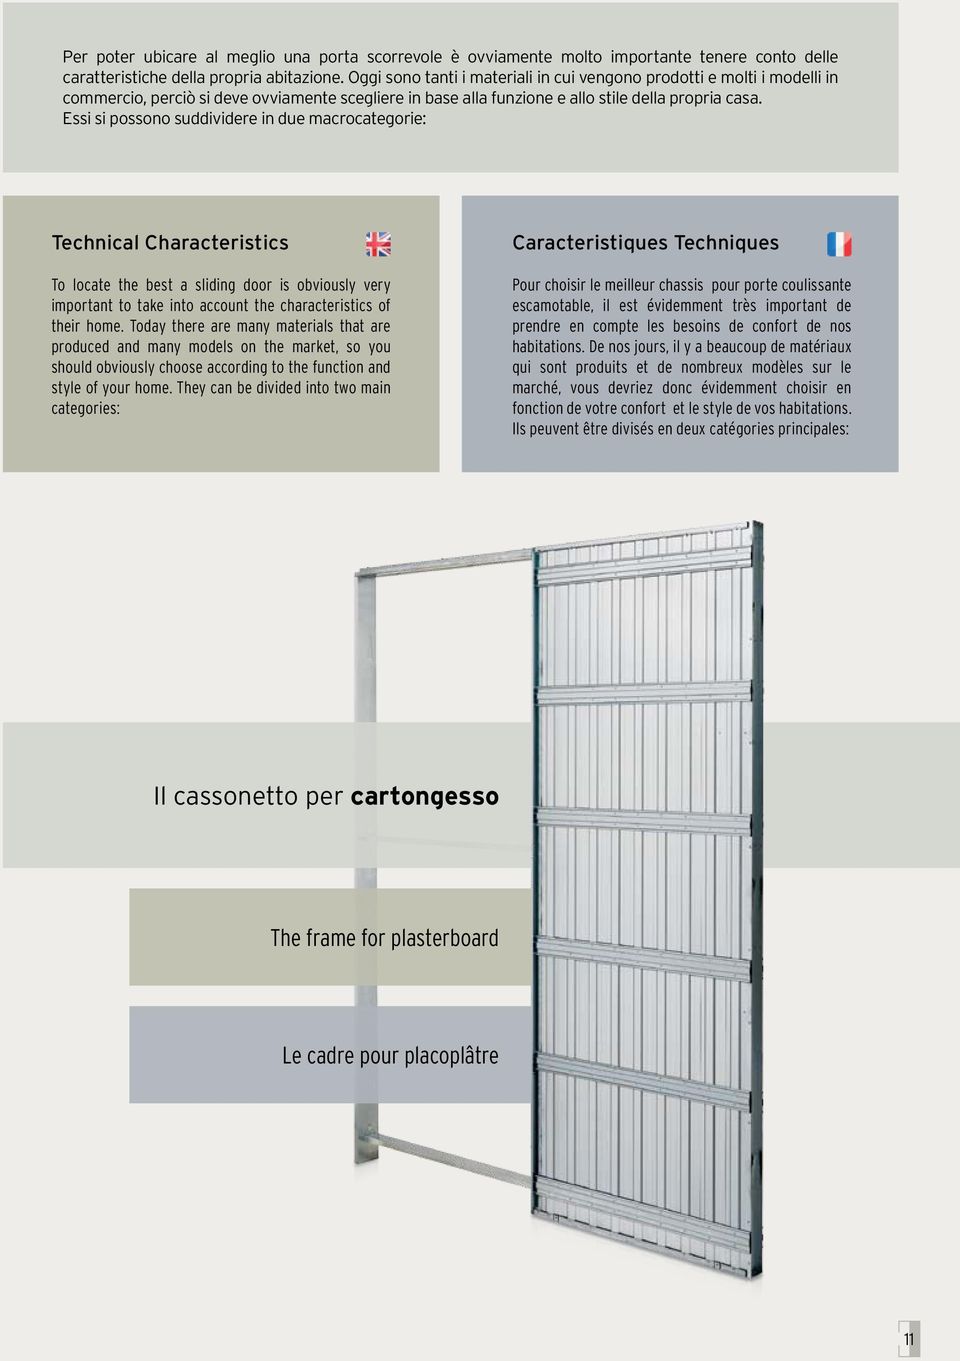 Essi si possono suddividere in due macrocategorie: Technical Characteristics To locate the best a sliding door is obviously very important to take into account the characteristics of their home.